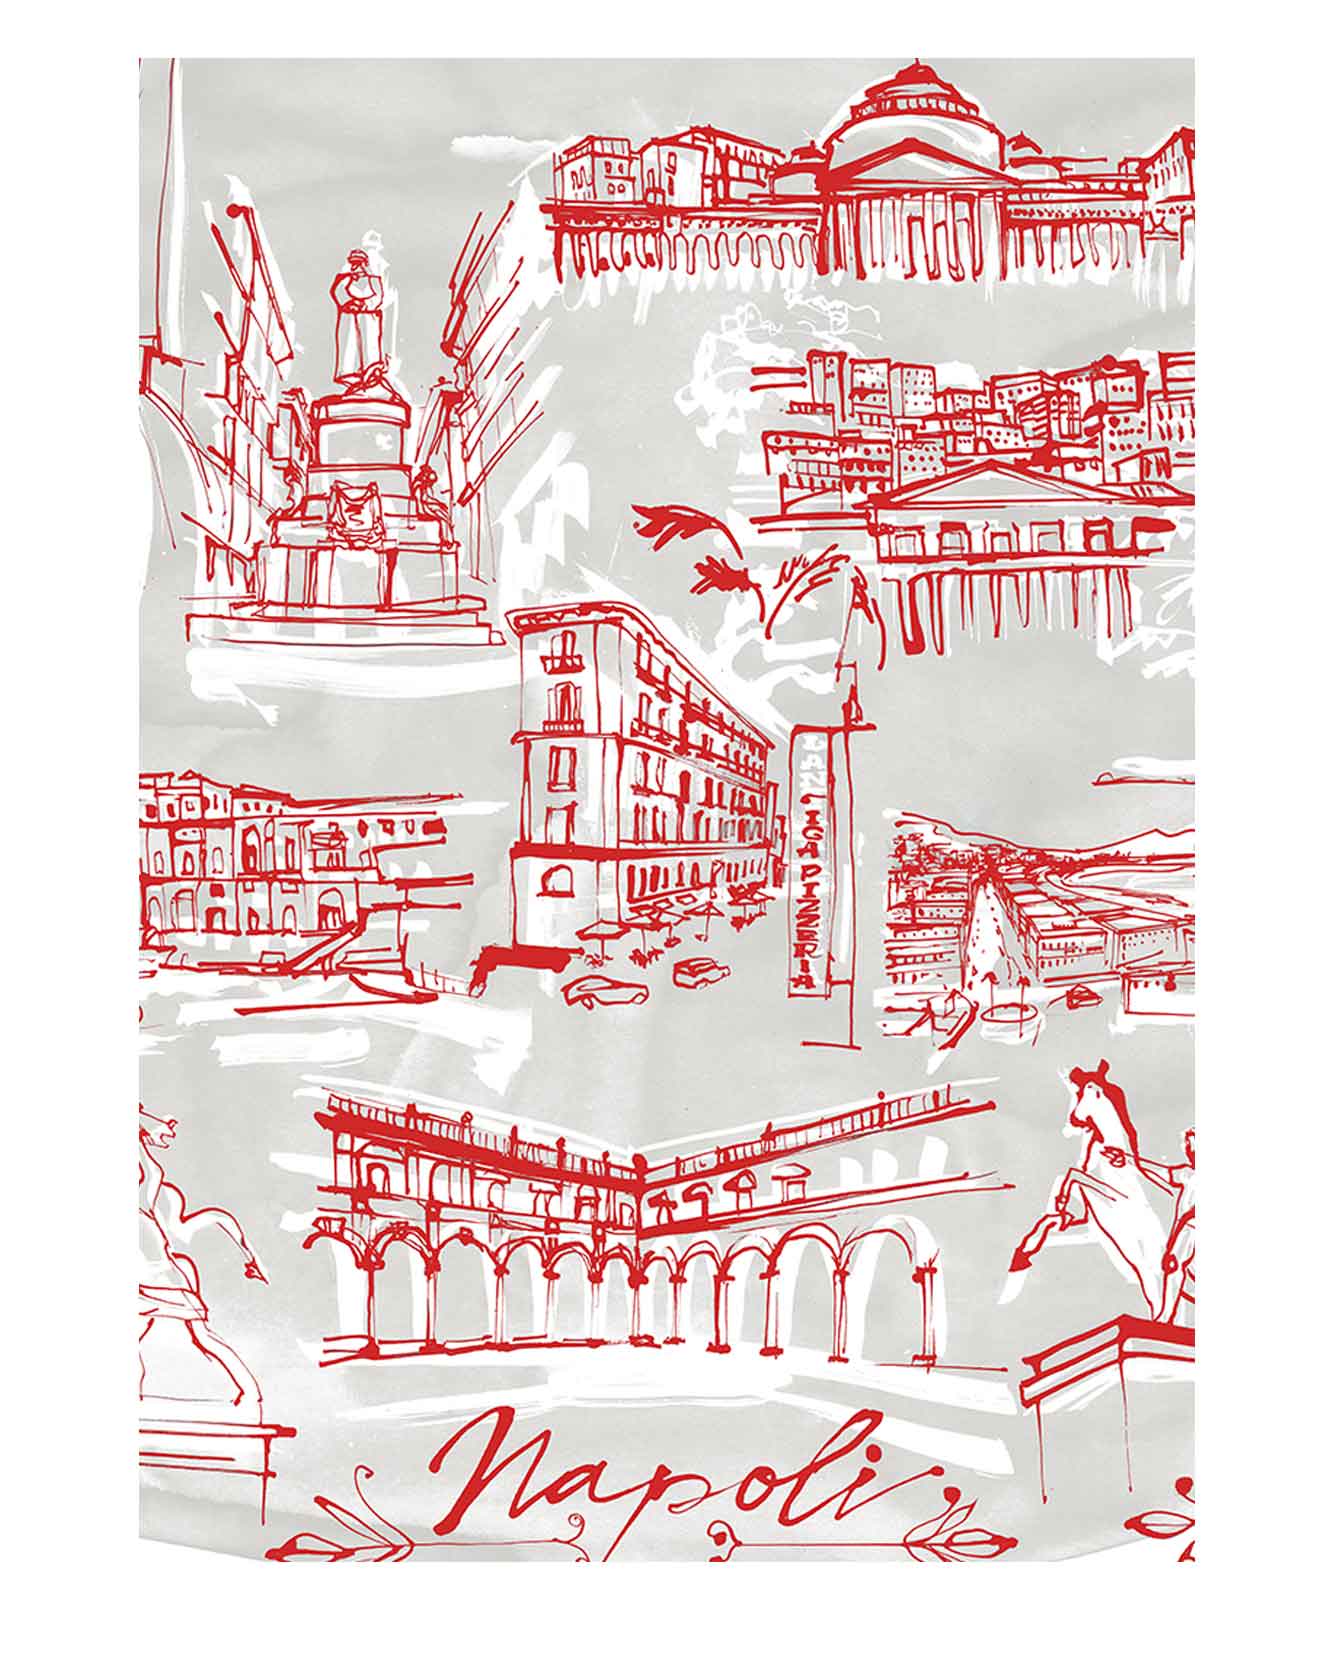 Detail. Silk scarf illustration. Inspired by Italian city of Naples for fashion brand Kitson, who's headquarters are in the ancient Italian city. Simple linear style illustration and flat colours taken from the fashion houses upcoming collections. With drawings of famous Naples landmarks and architecture.